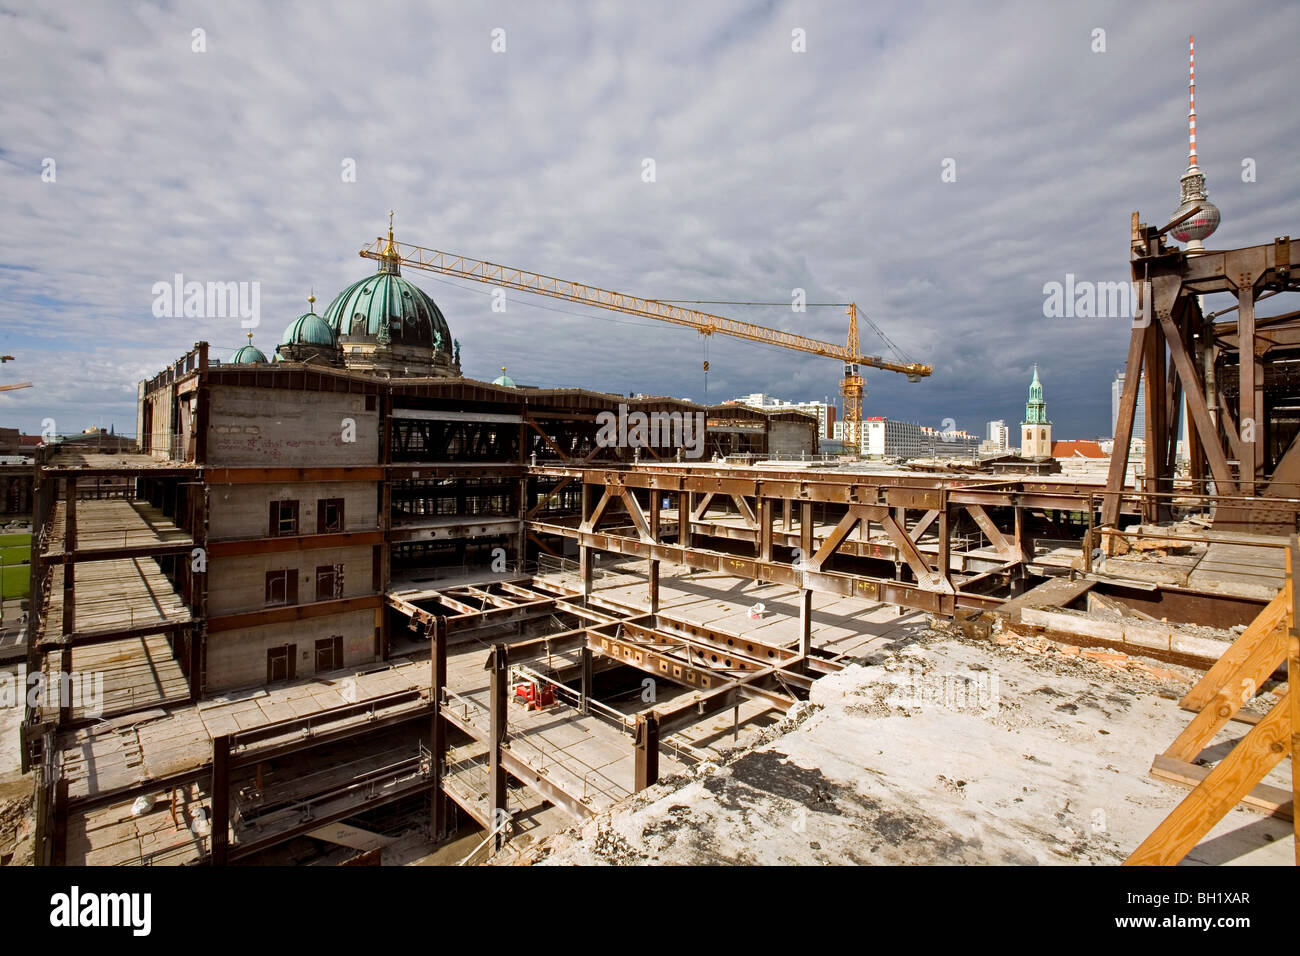 The Palast der Republik, Palace of the Republic, demolition started in February 2006, Berlin Stock Photo